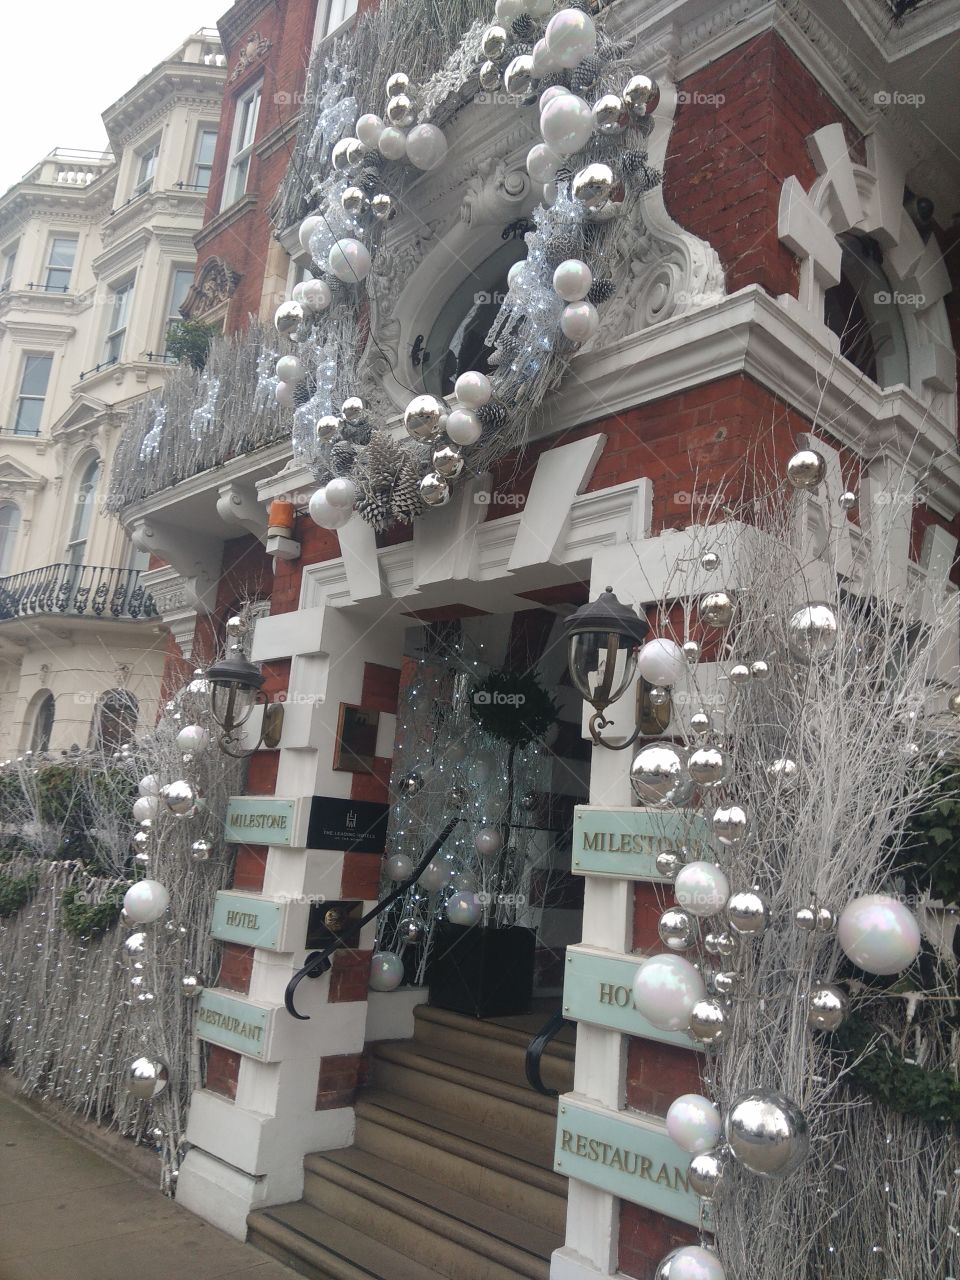 Decorated hotel on London